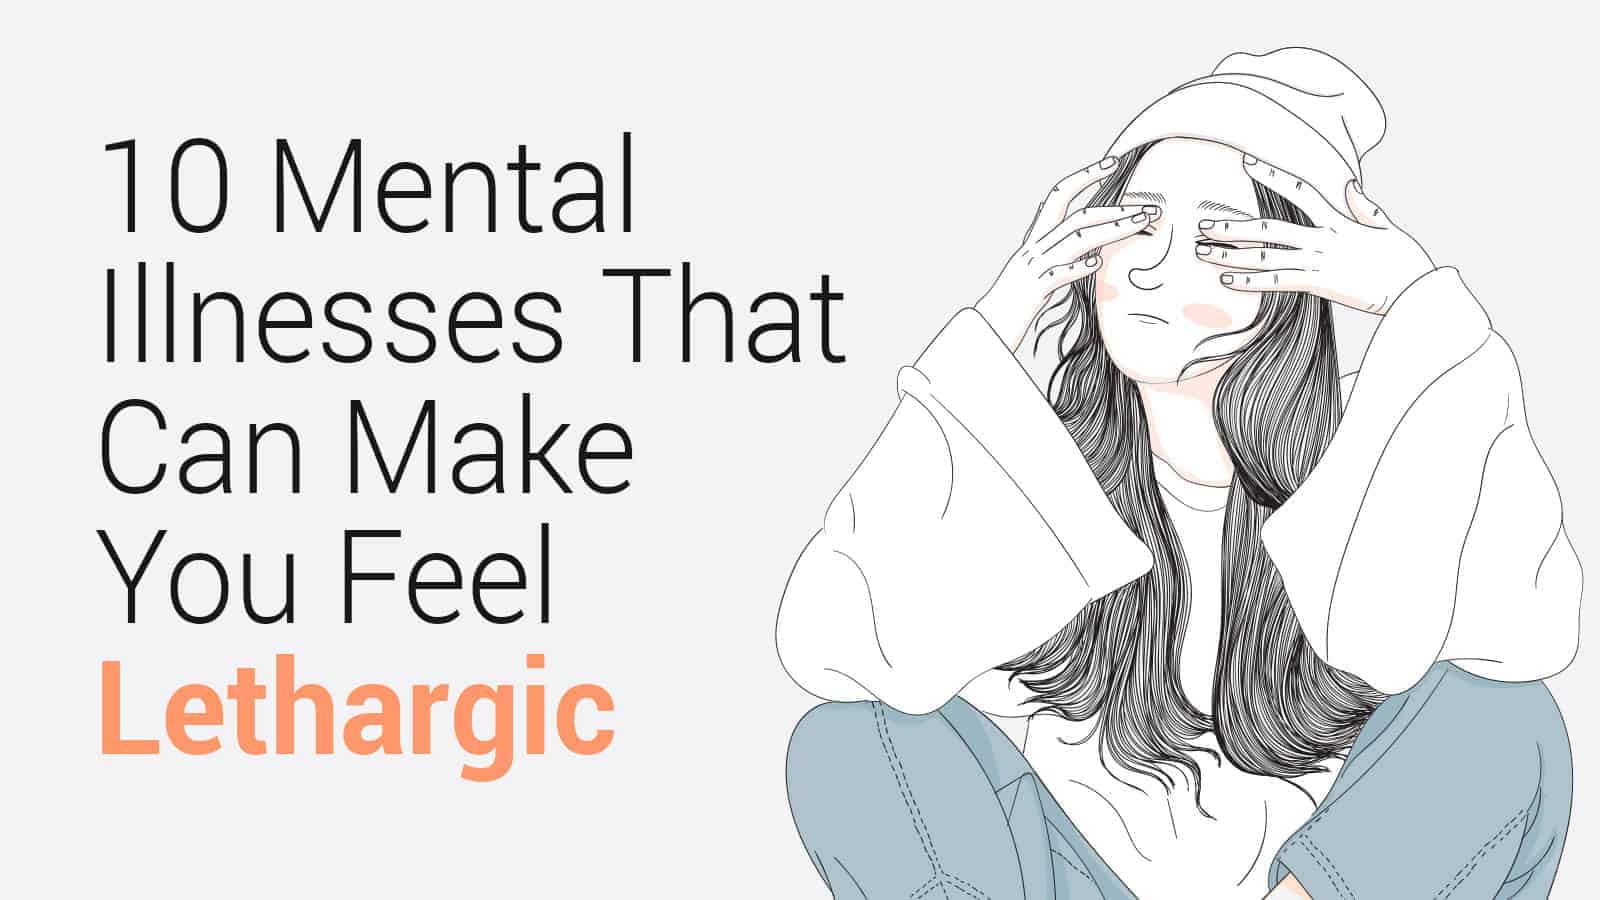 10 Mental Illnesses That Can Make You Feel Lethargic